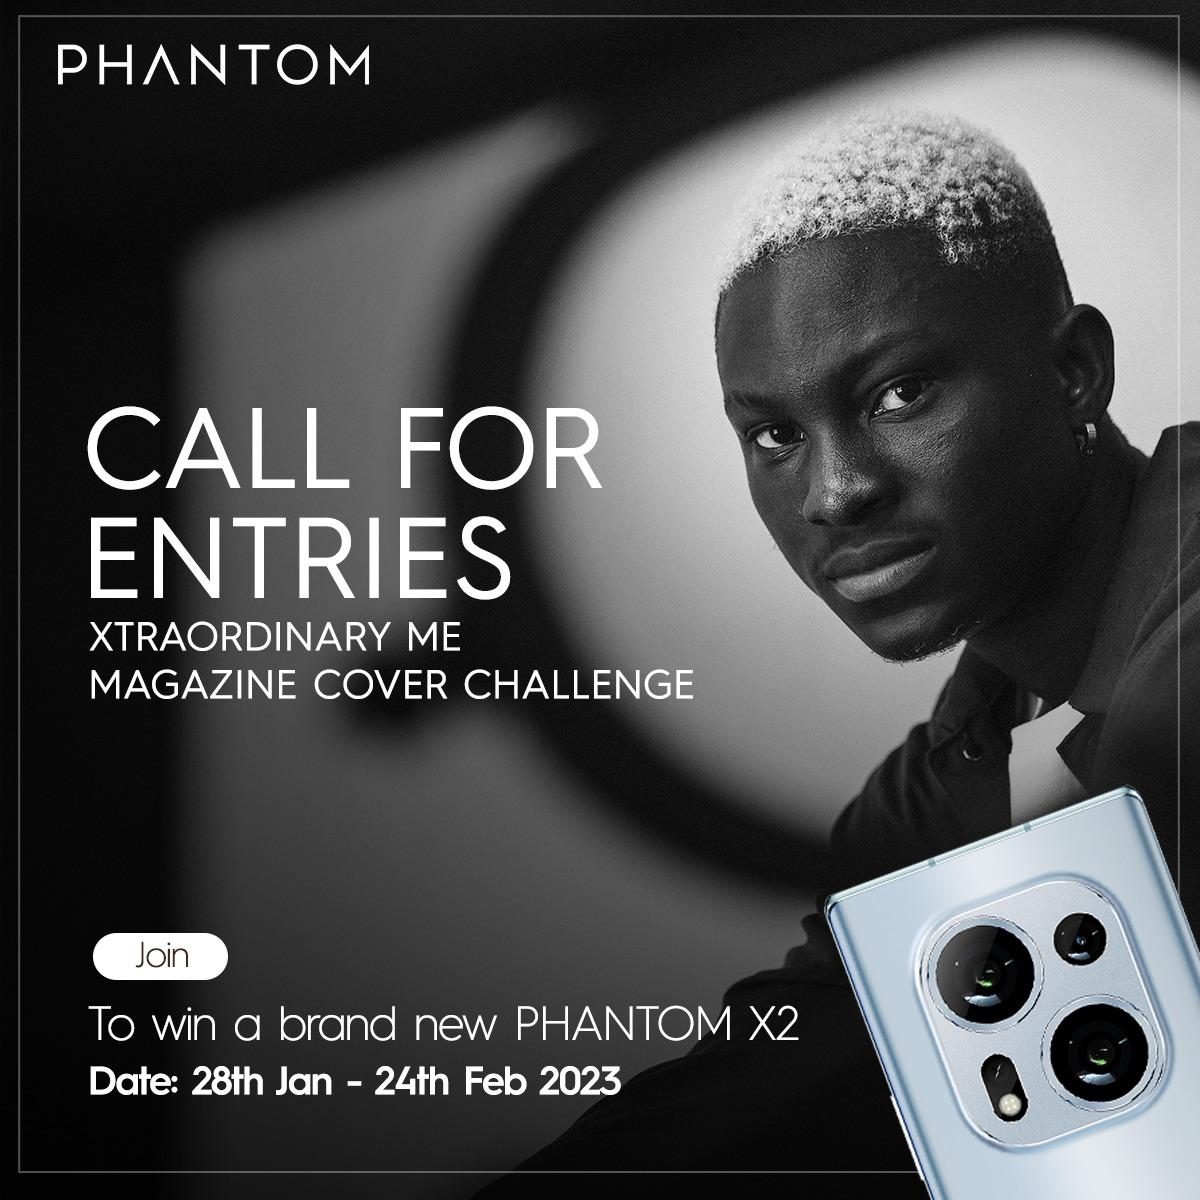 May be an image of 1 person and text that says 'PHANTOM CALL FOR ENTRIES XTRAORDINARY ME MAGAZINE COVER CHALLENGE Join To win a brand new PHANTOM X2 Date: 28th Jan 24th Feb 2023'